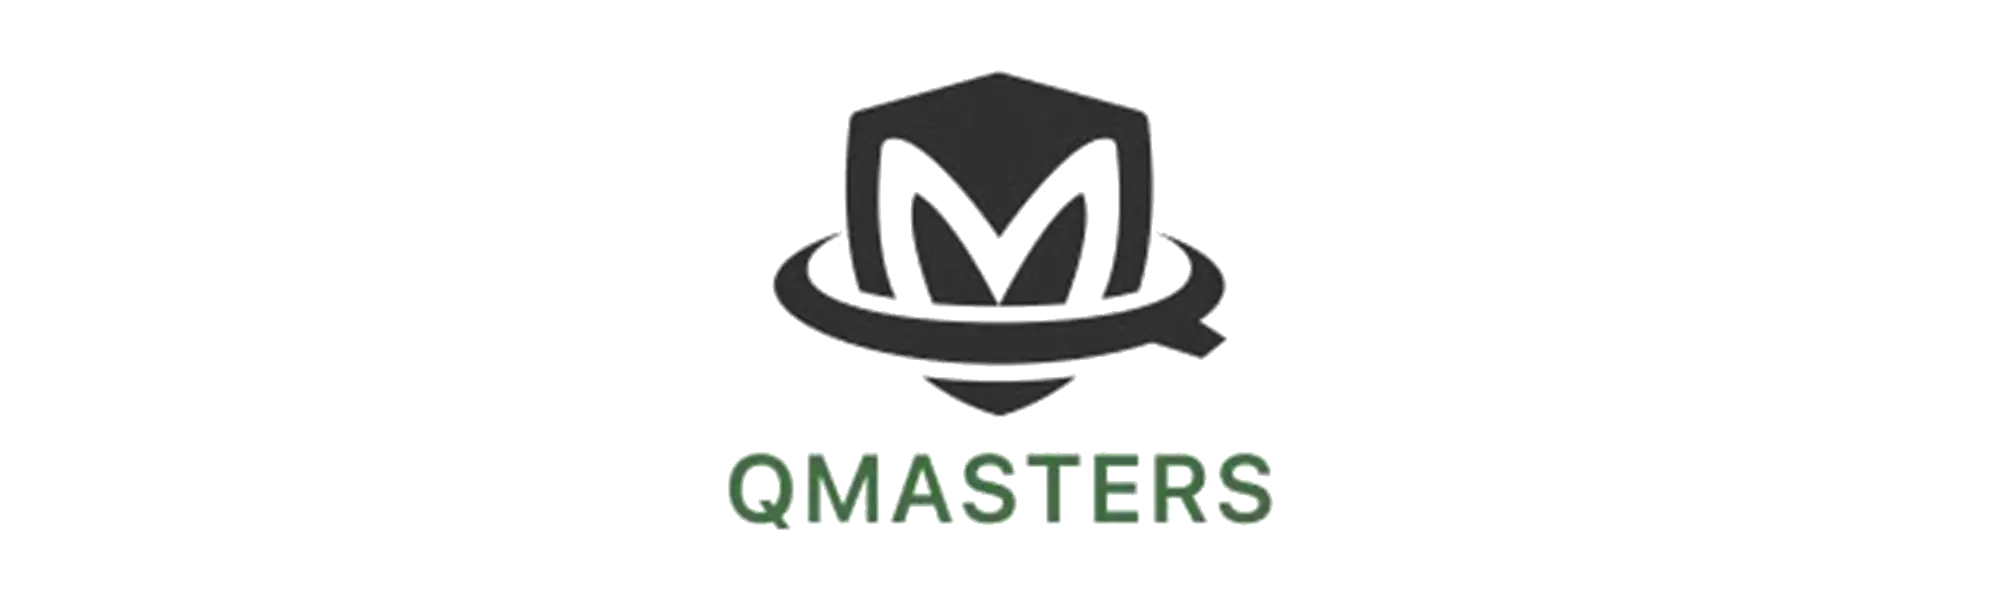 Qmasters Security